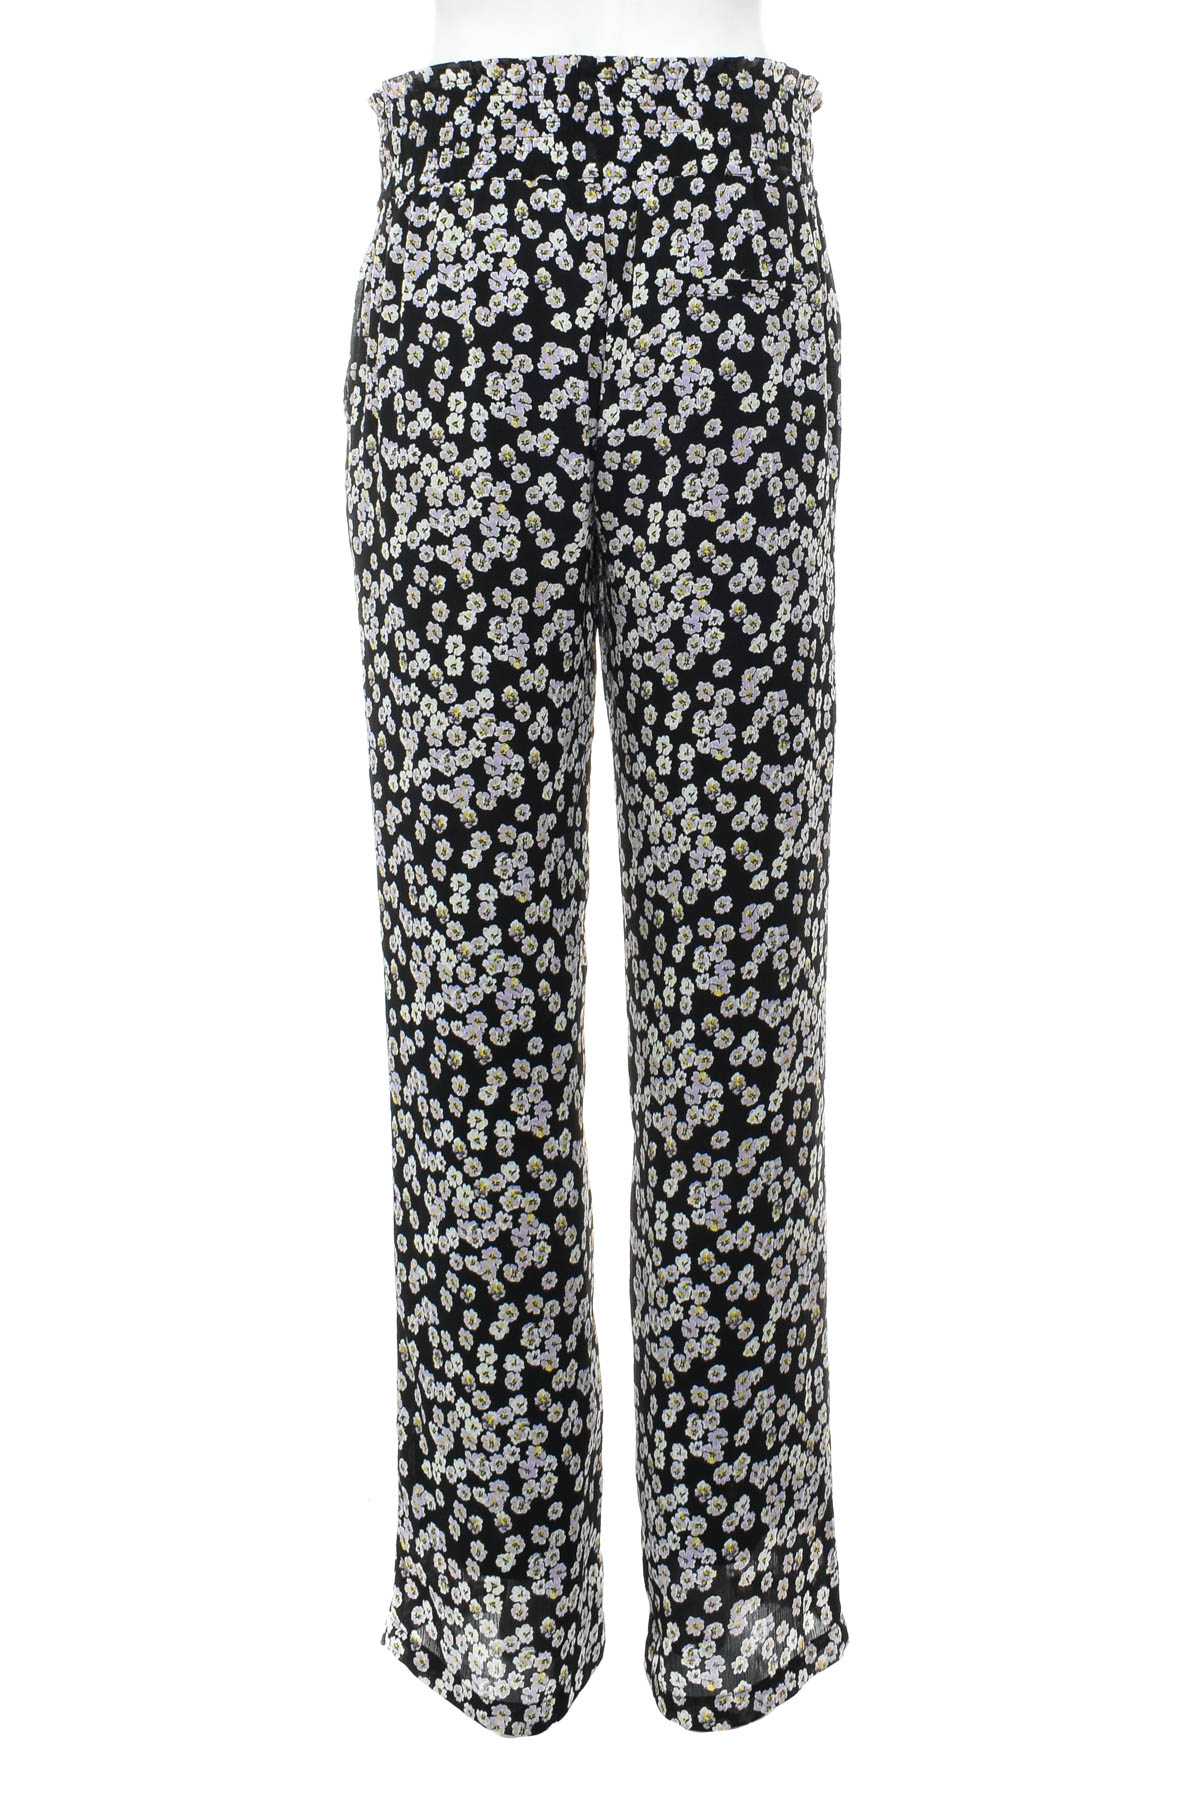 Women's trousers - Another-Label - 1